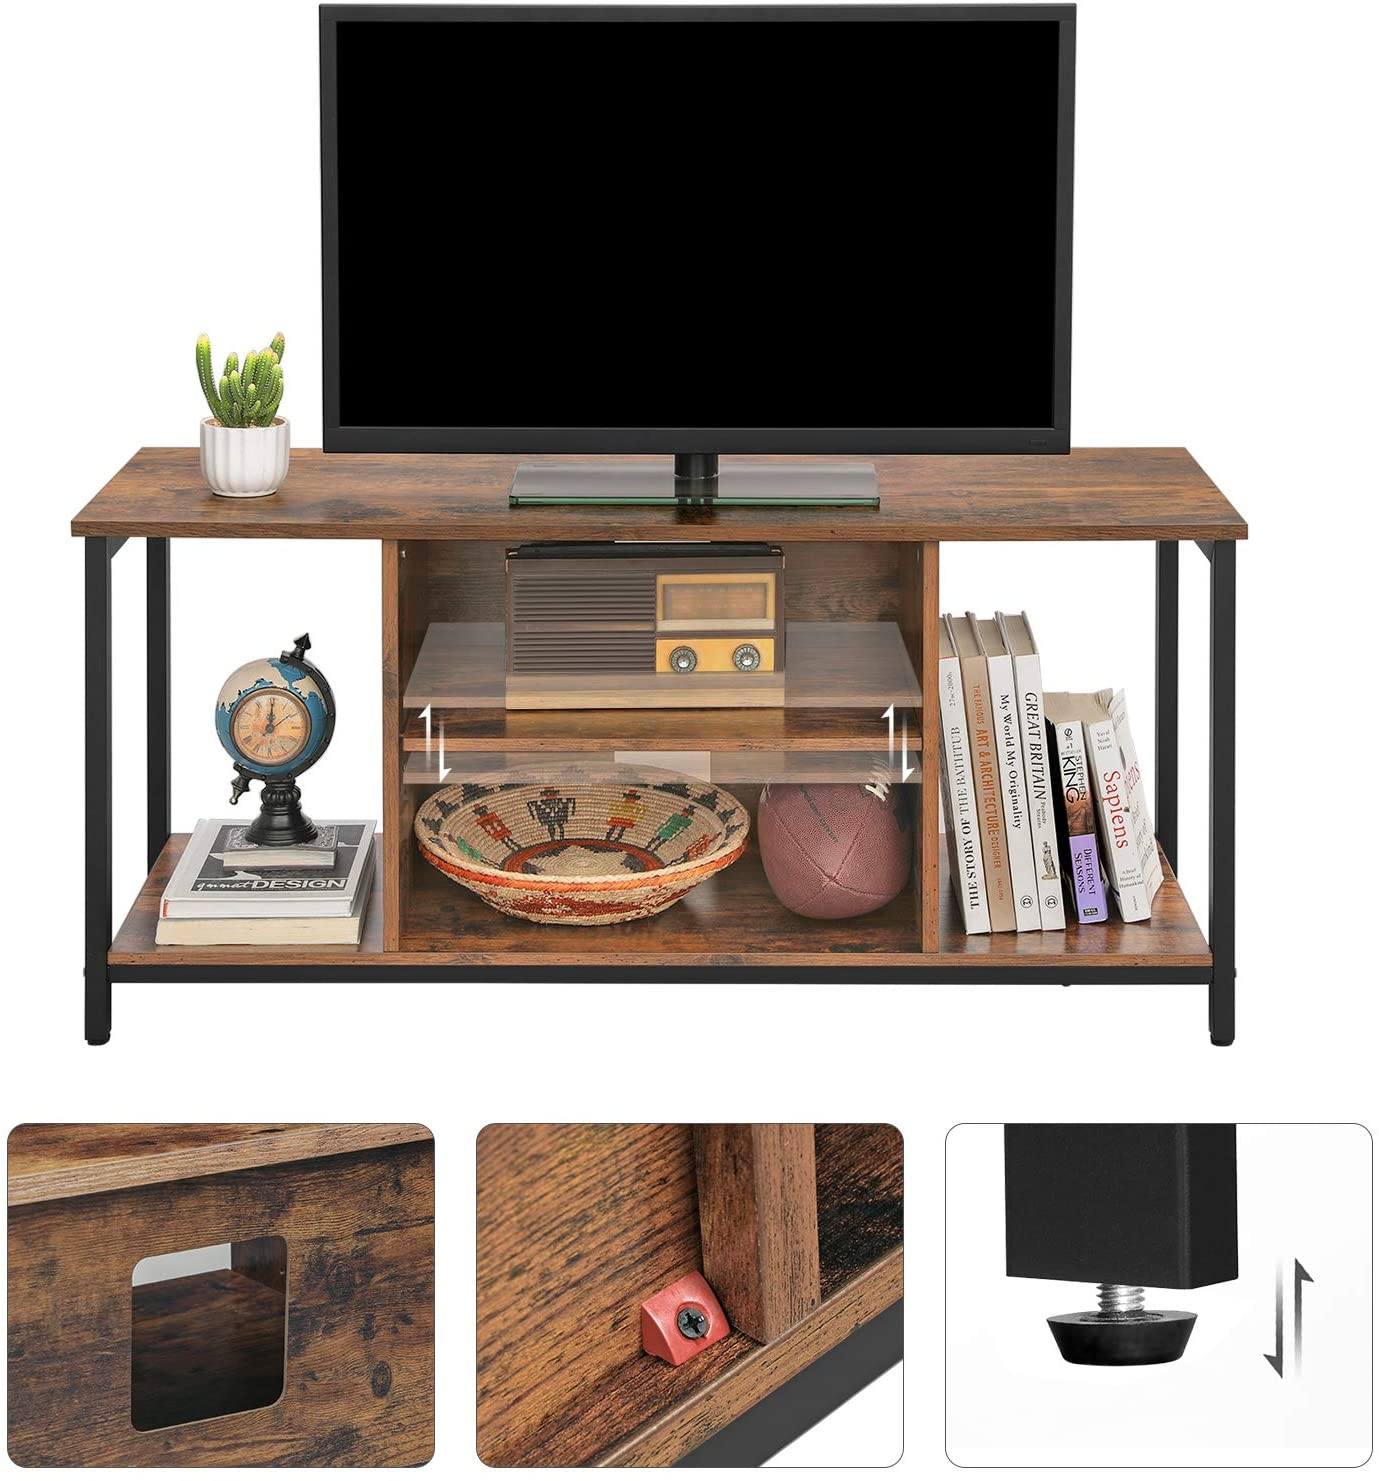 TV Stand, Cabinet with Open Storage, TV Console Unit with Shelving, for Living Room, Entertainment Room, Rustic Brown LTV39BX RAW58.dk 